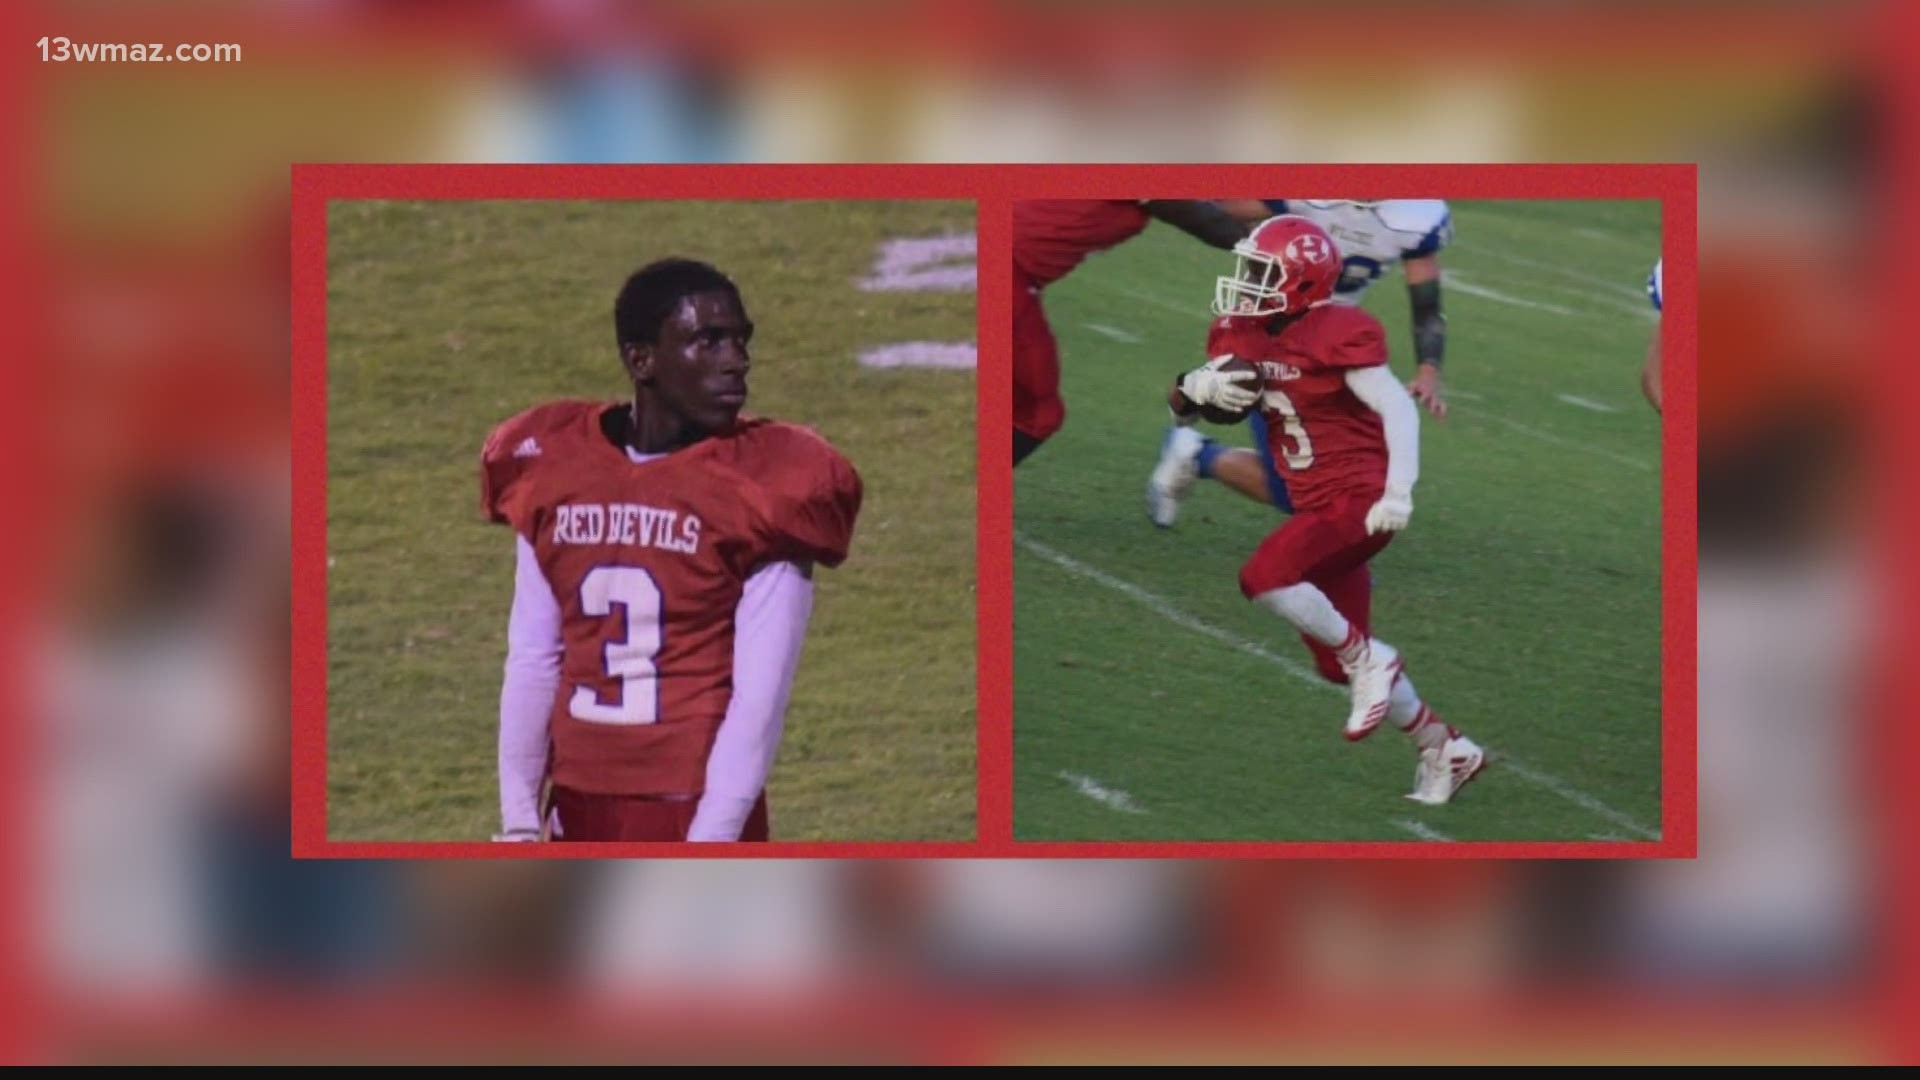 According to Hawkinsville High School Athletic Director David Daniell, Markell Lawson passed away over the weekend after a battle with cancer.